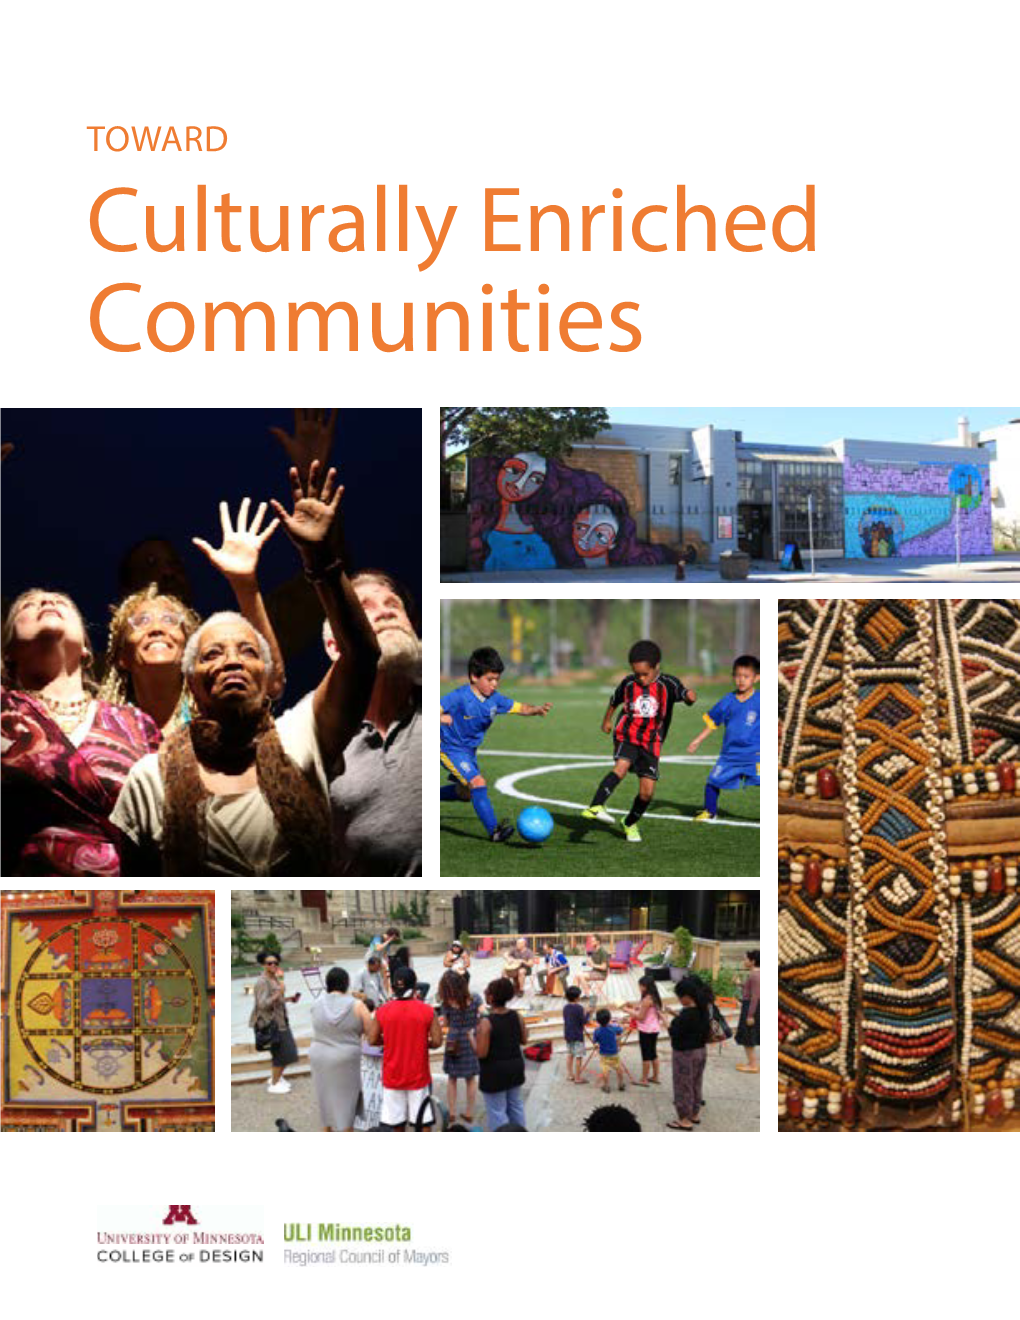 Principles of Culturally Enriched Communities